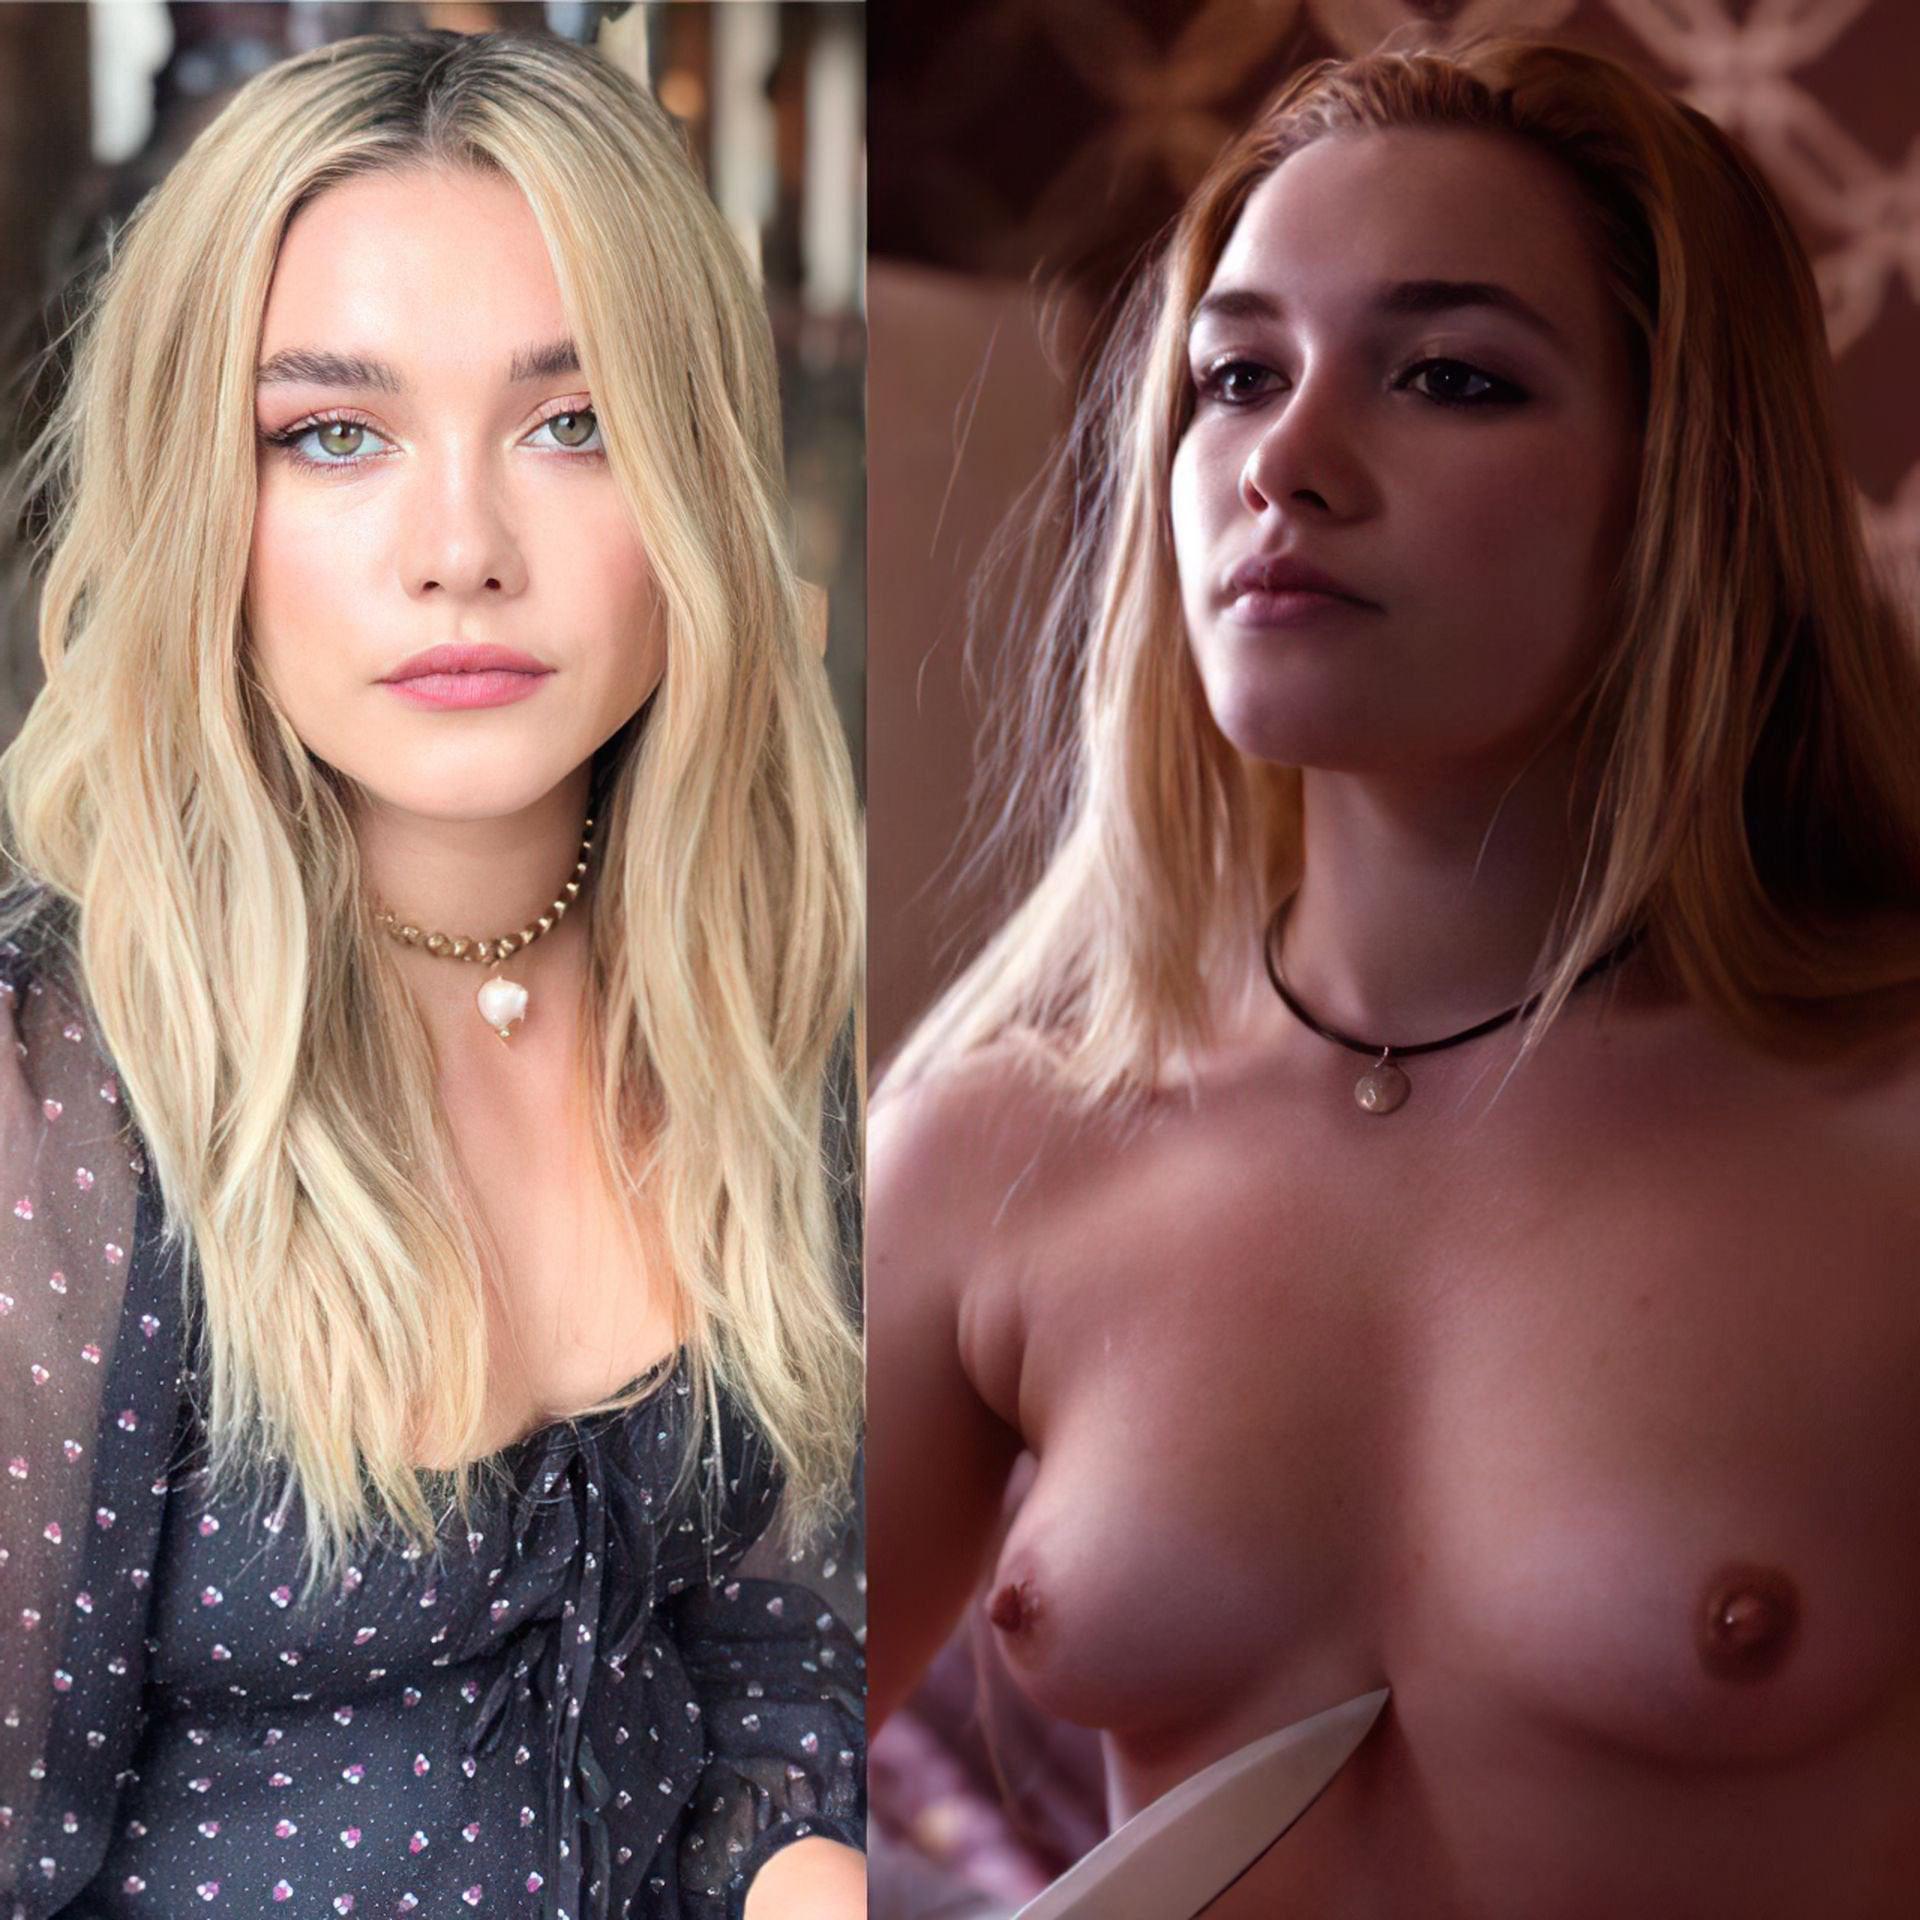 Havent jerked off to Florence Pugh yet